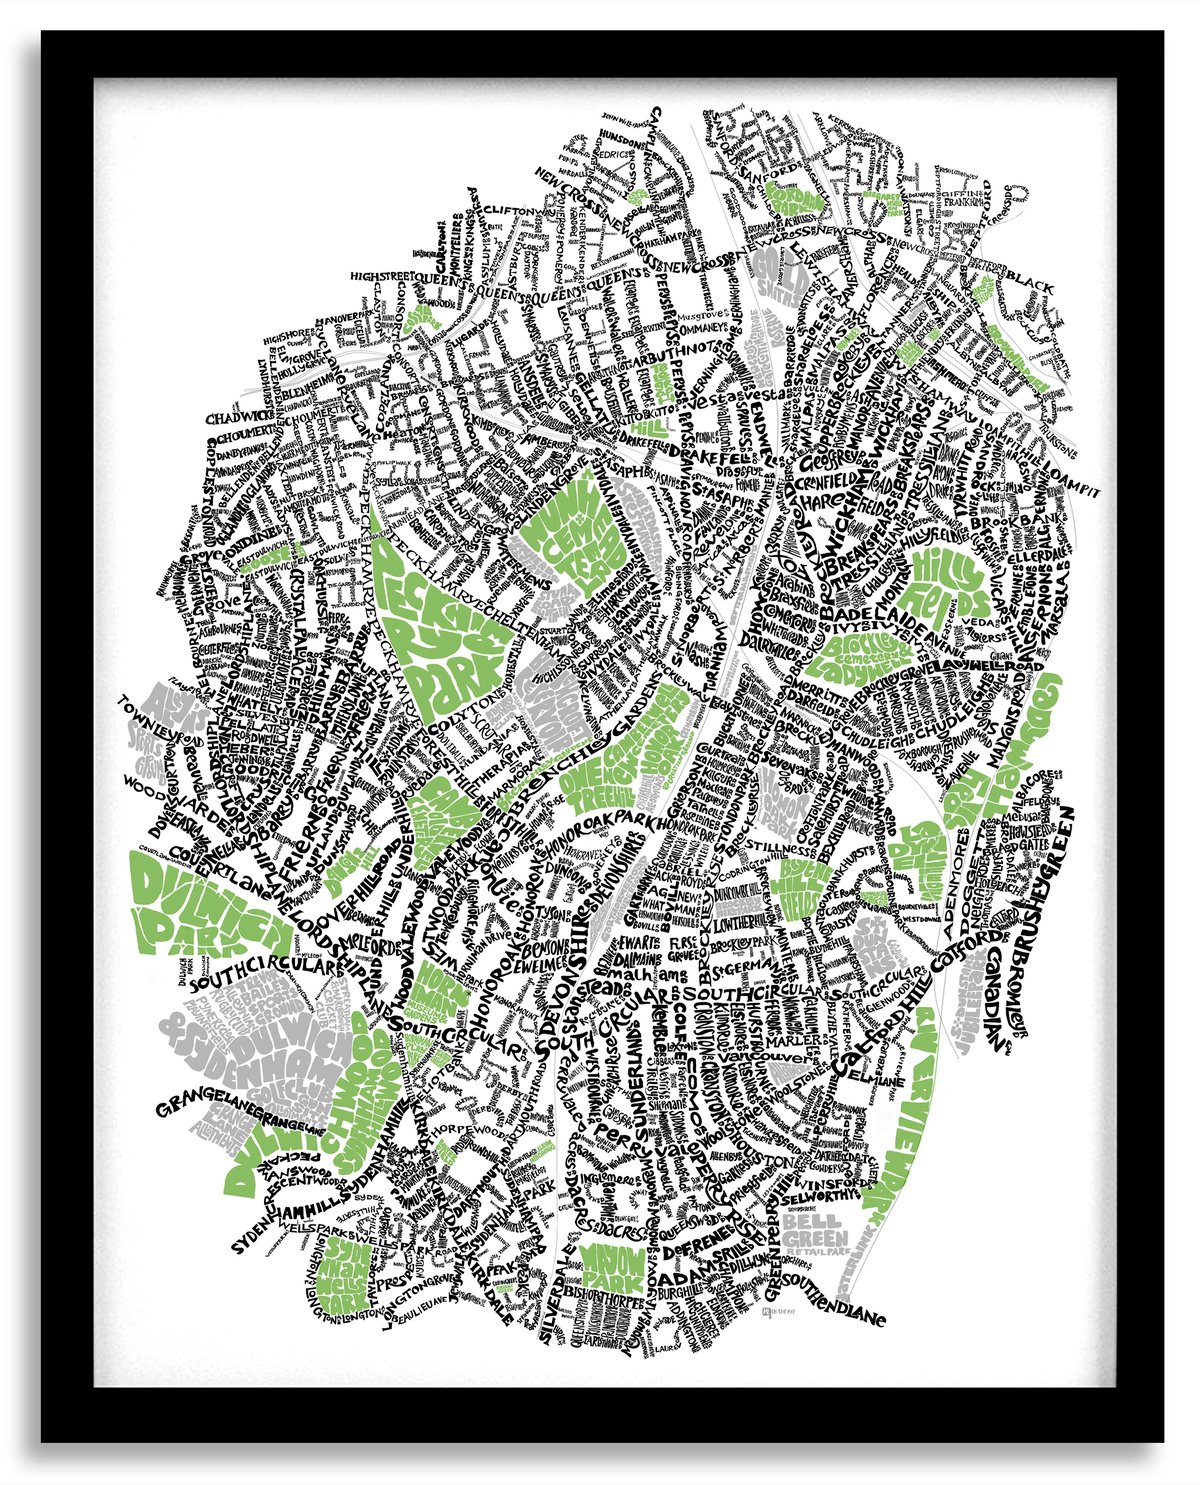 Image of SE London Parks – New Cross - Brockley - Nunhead - Forest Hill - Dulwich - Sydenham - Type Map